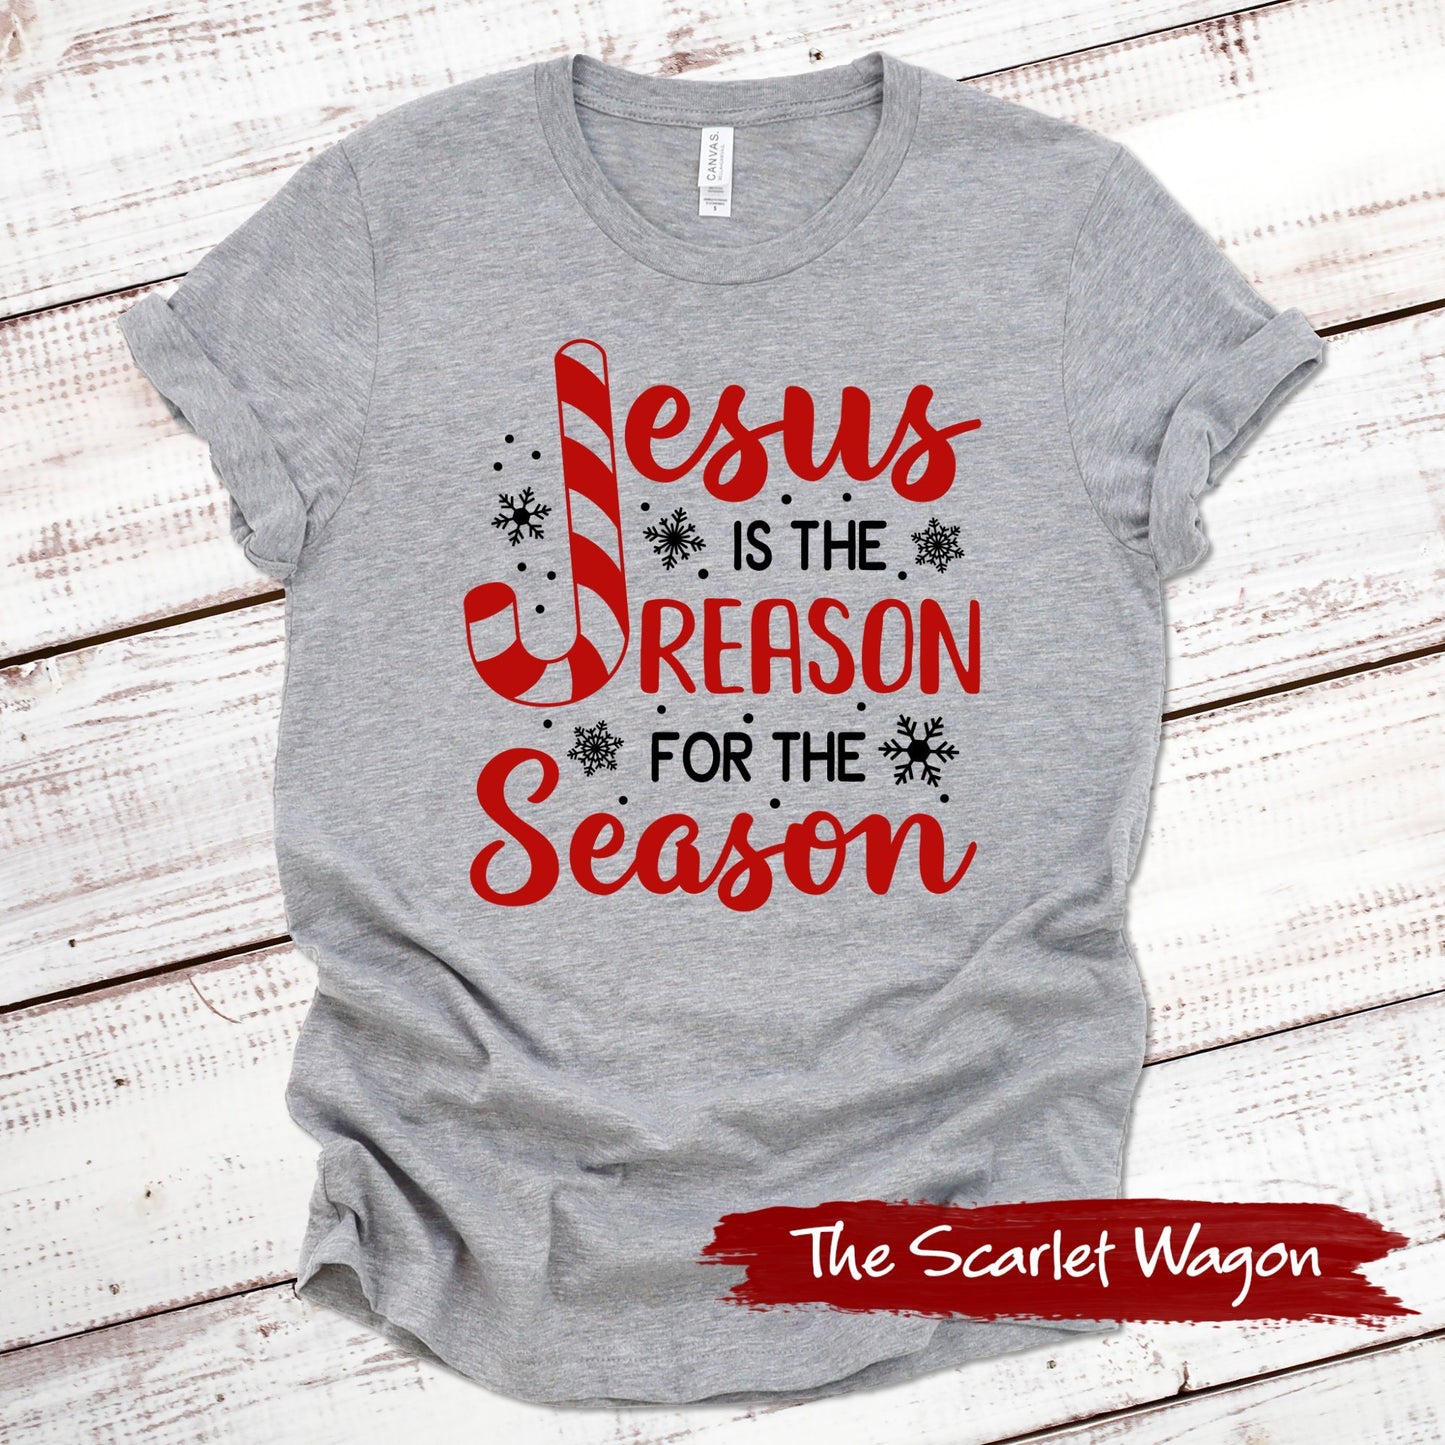 Jesus is the Reason for the Season Christmas Shirt Scarlet Wagon Athletic Heather XS 